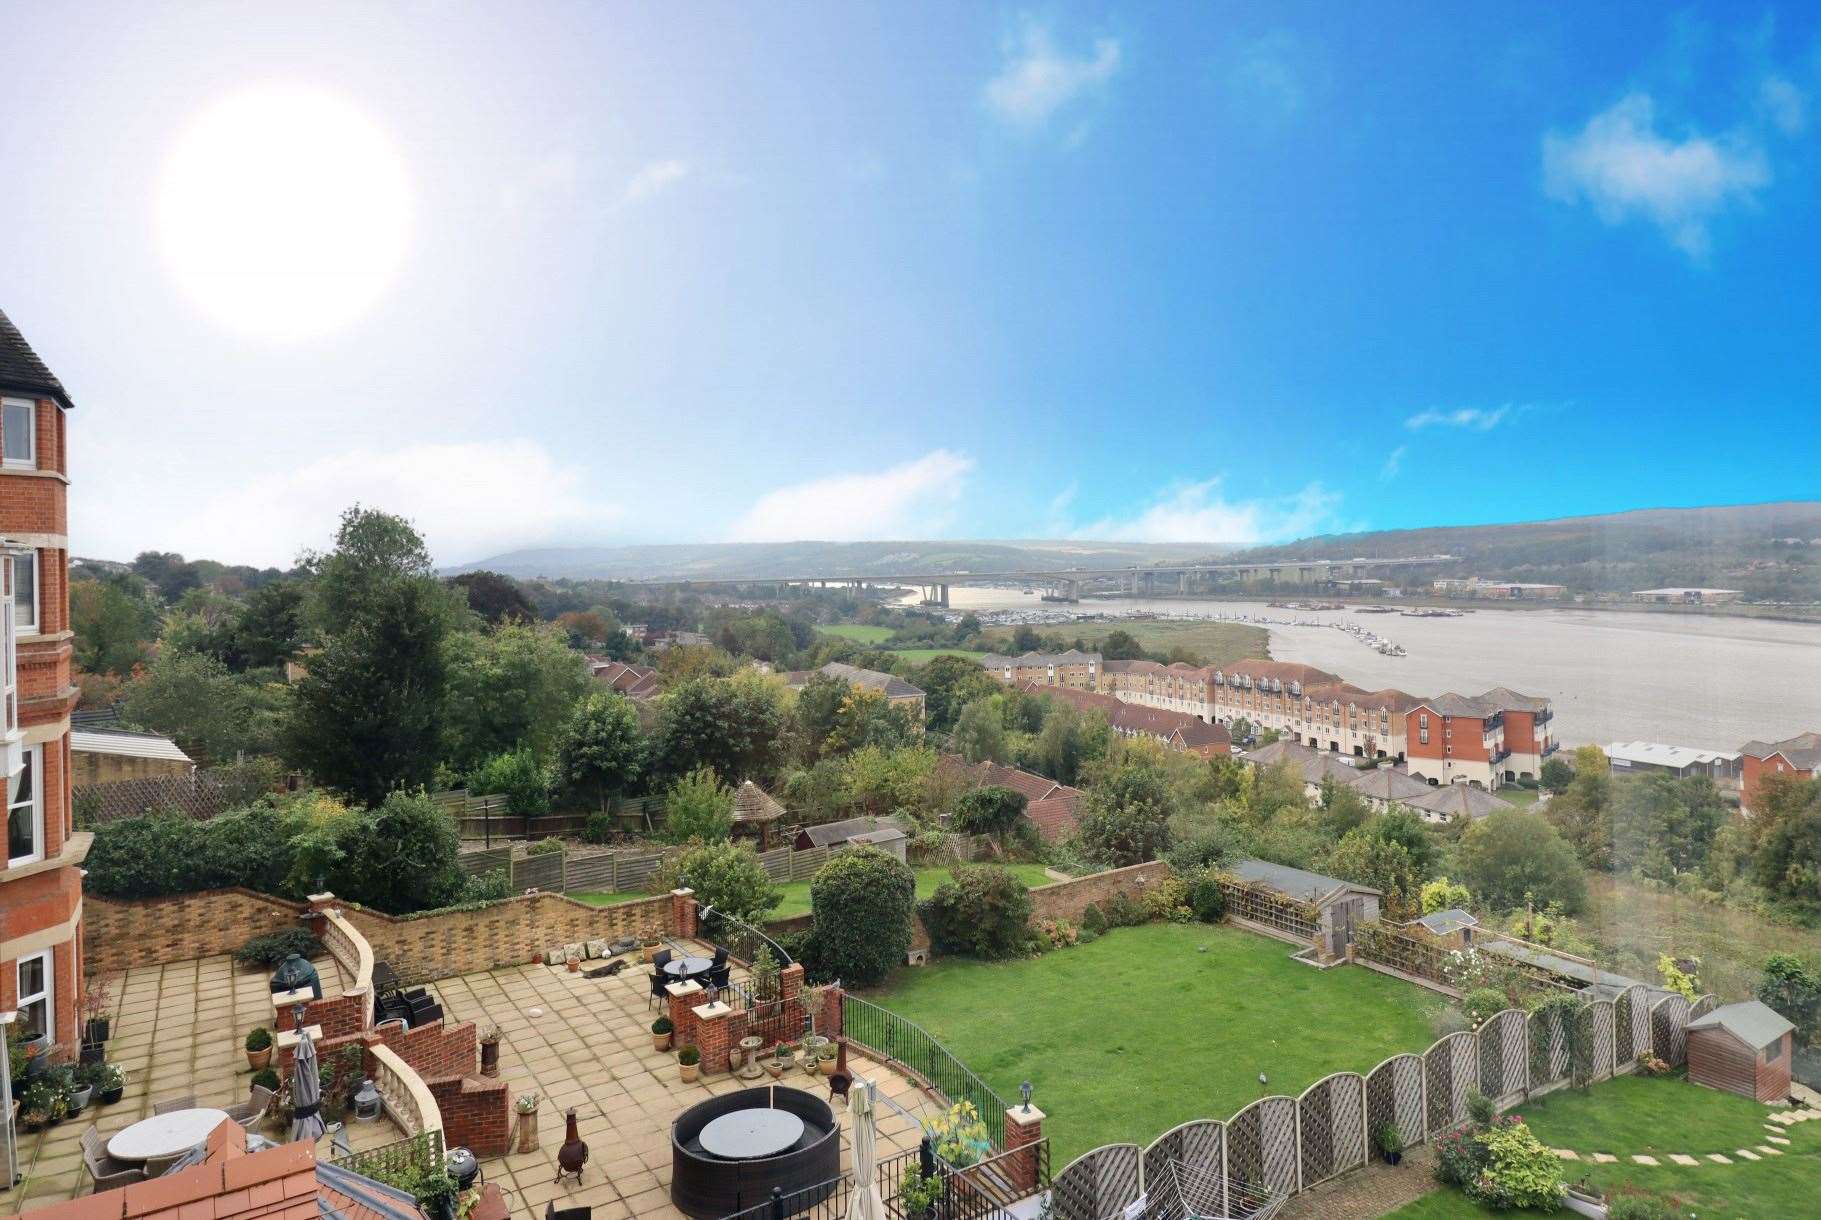 The property offers stunning views over the River Medway